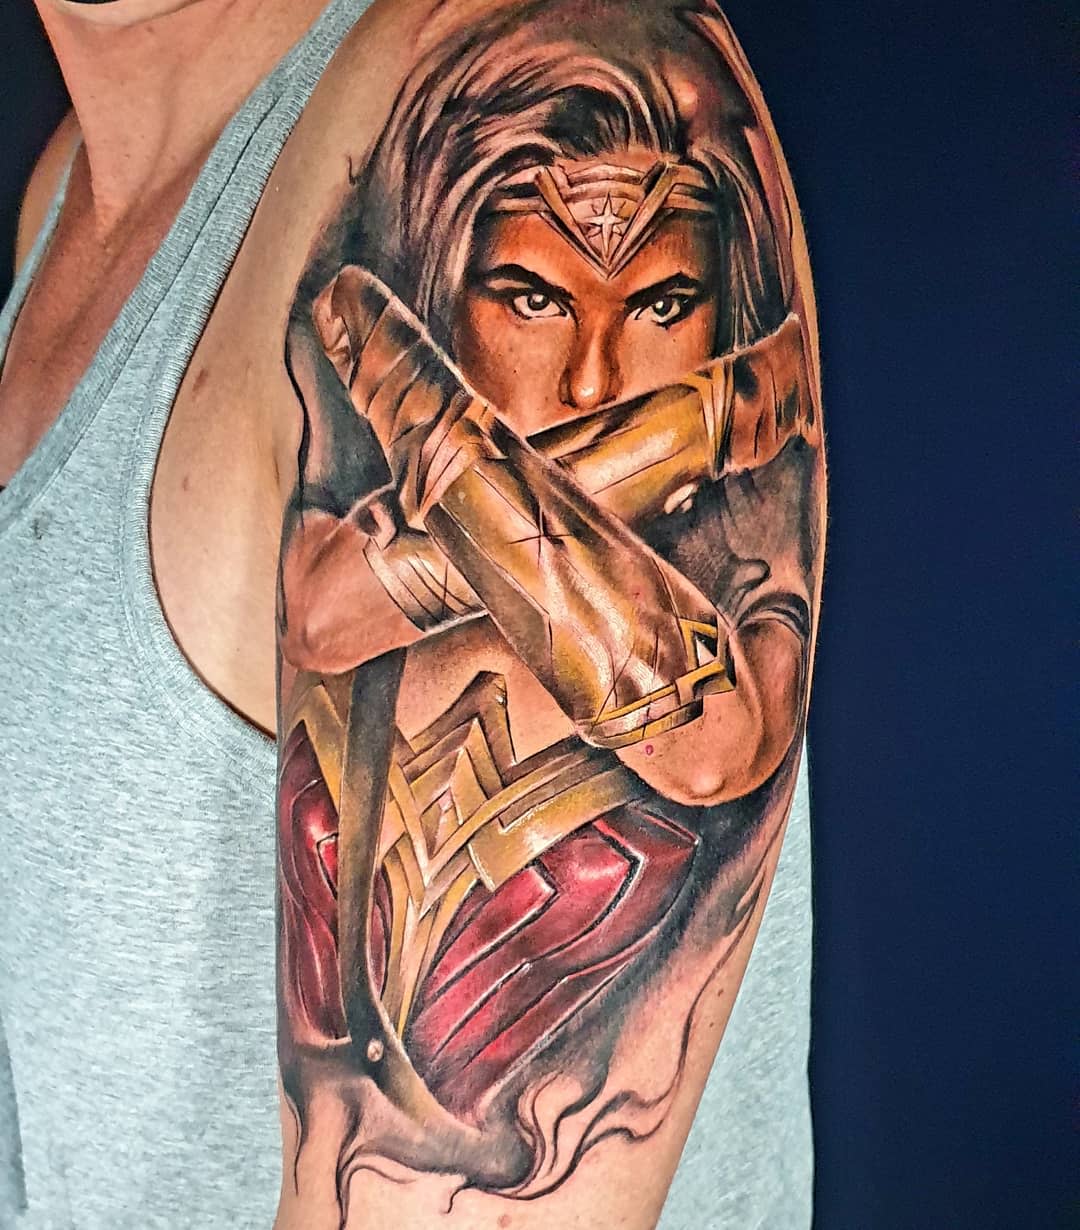 Wicked Wonder Woman Tattoo Ideas Inspiration Guide